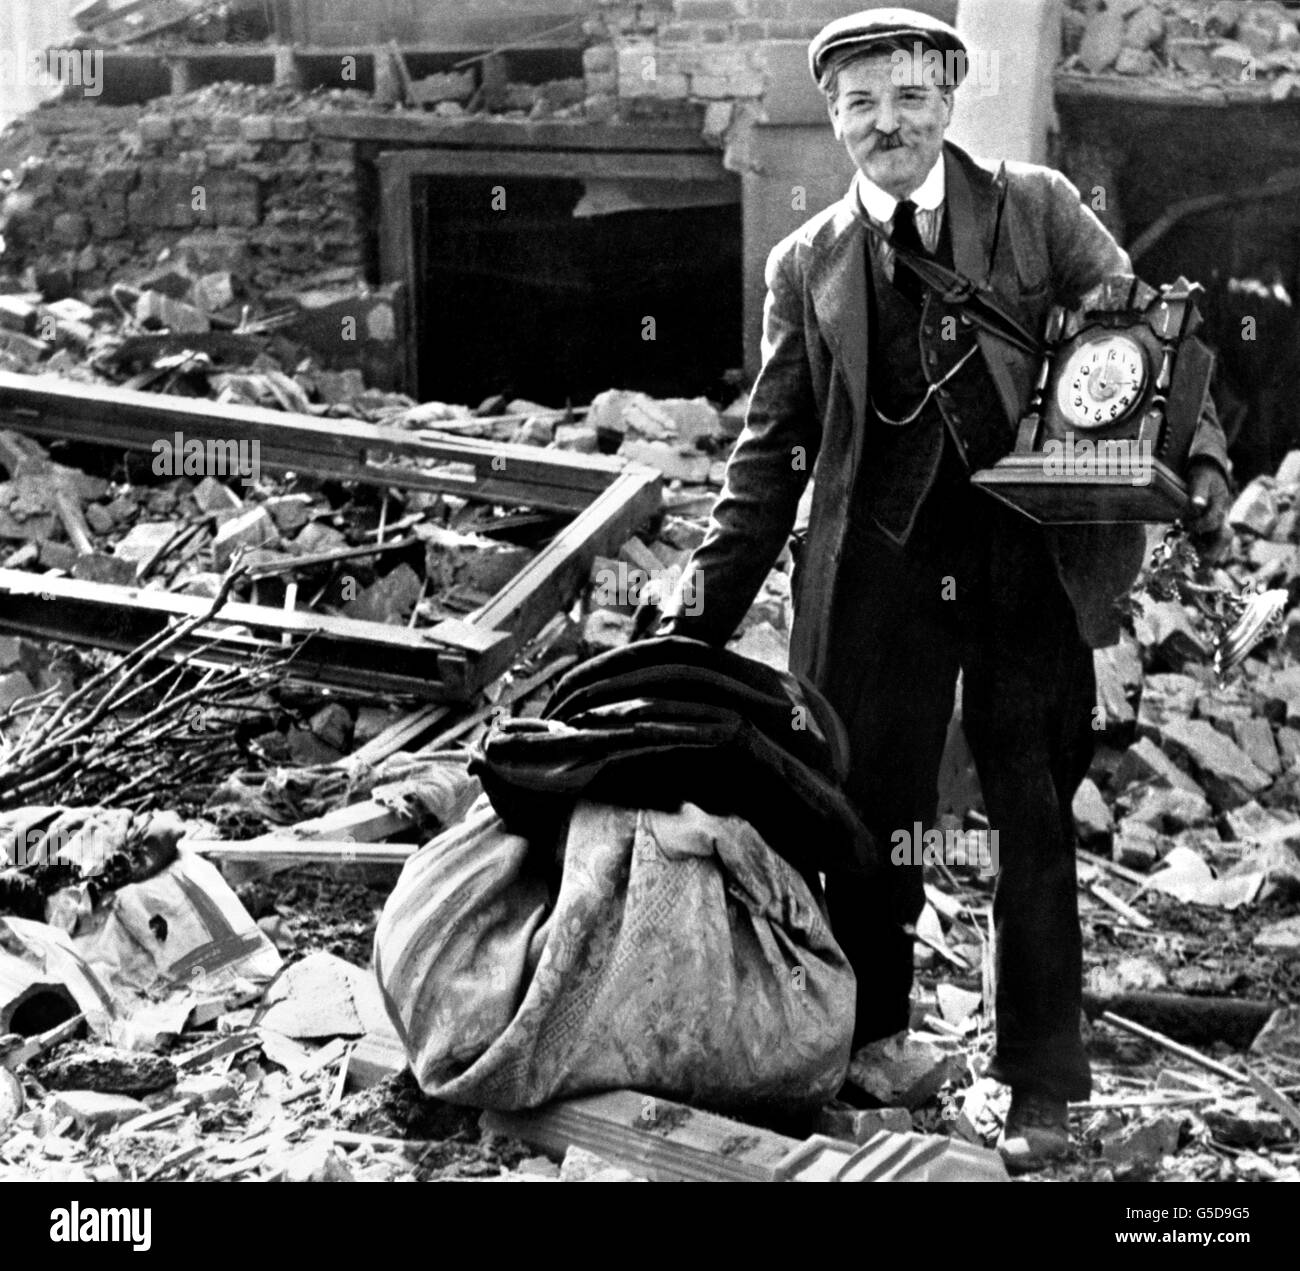 A Londoner, still smiling, while recovering the remains of his belongings from the rubble of his bomb-damaged home. Stock Photo